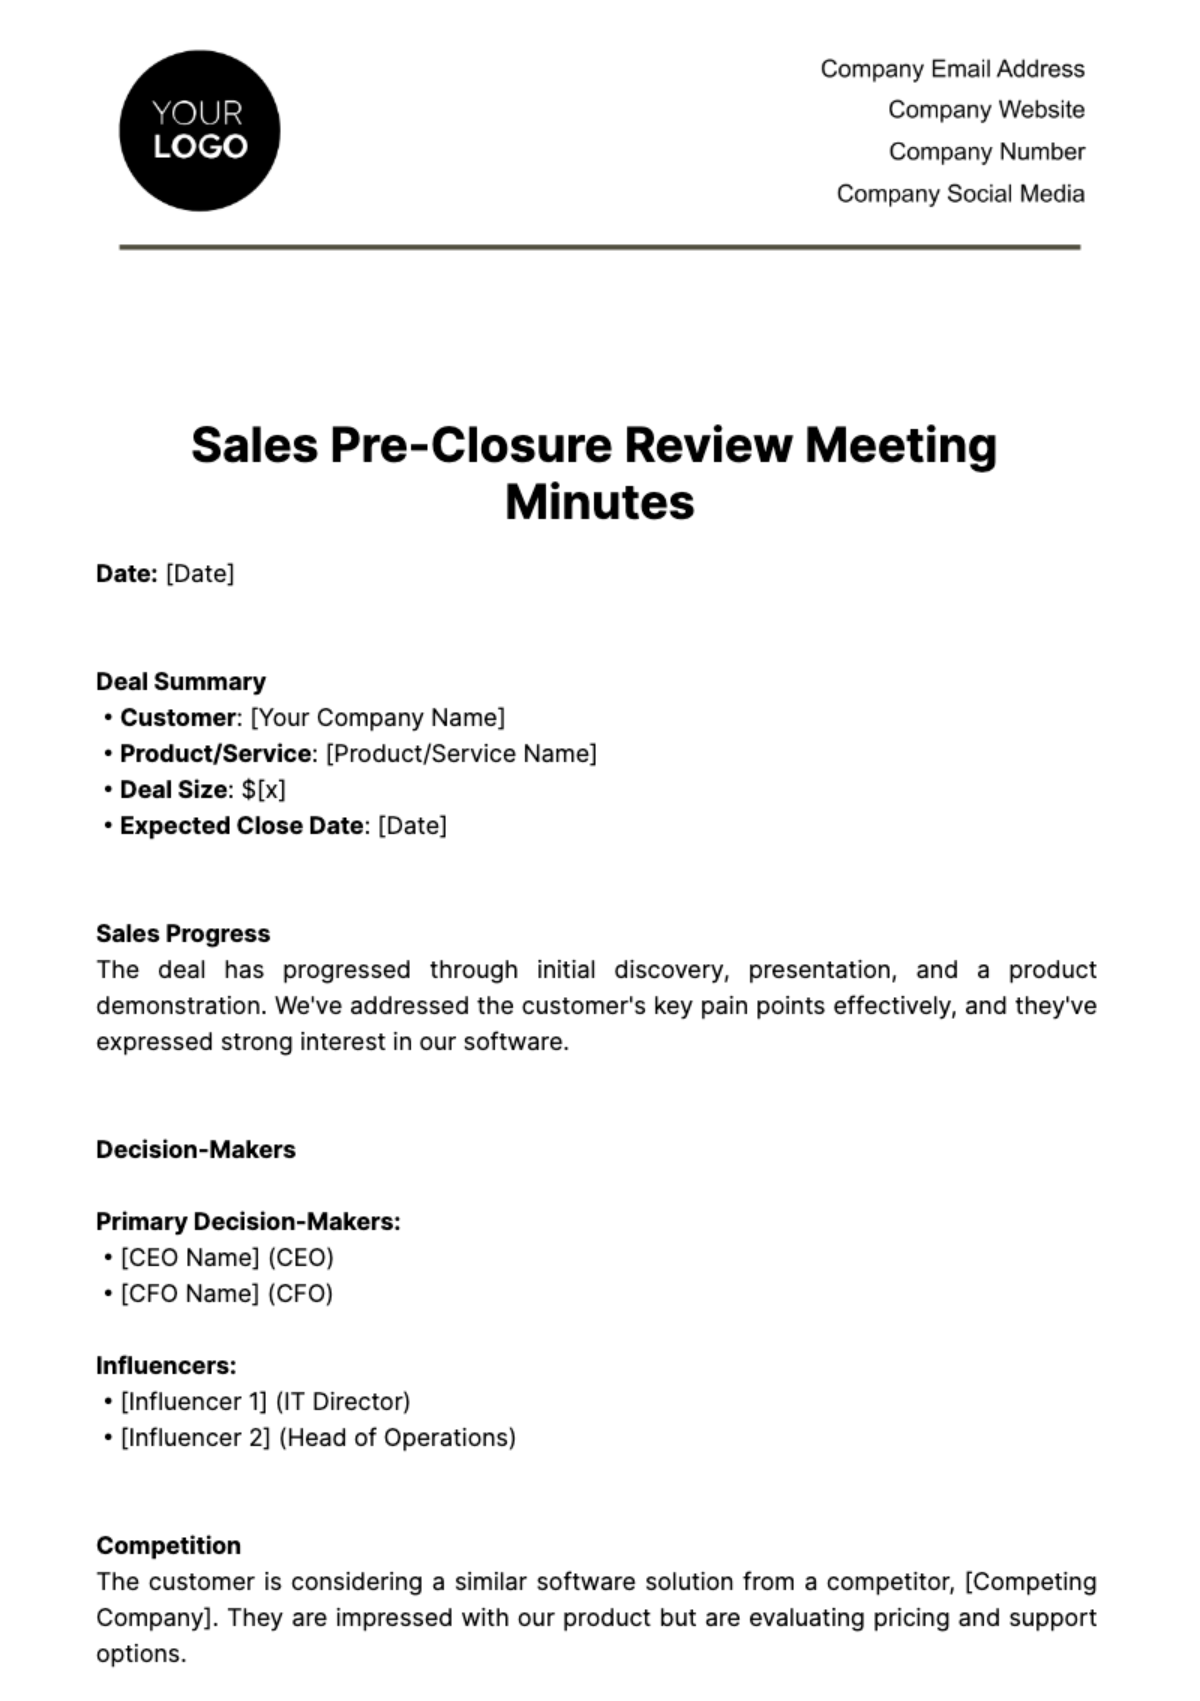 Sales Minute for Pre-Closure Review Meeting Template